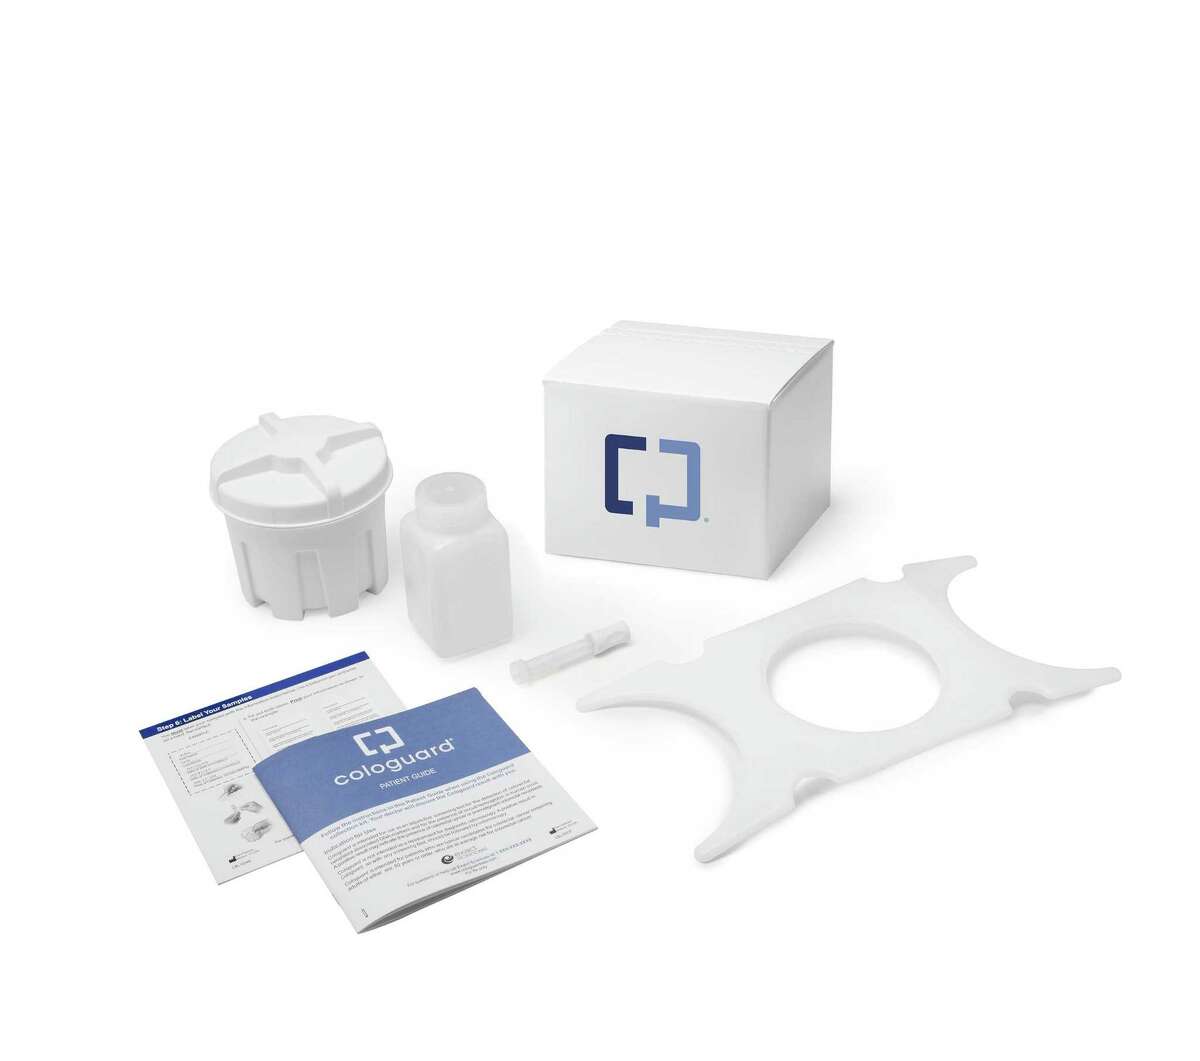 This undated product image provided by the Mayo Clinic shows the Cologuard test. The test is the first to look for cancer-related DNA in stool, and was approved by the Food and Drug Administration last month. It will be offered by prescription at the Mayo Clinic in Minnesota, where it was developed, and nationwide.